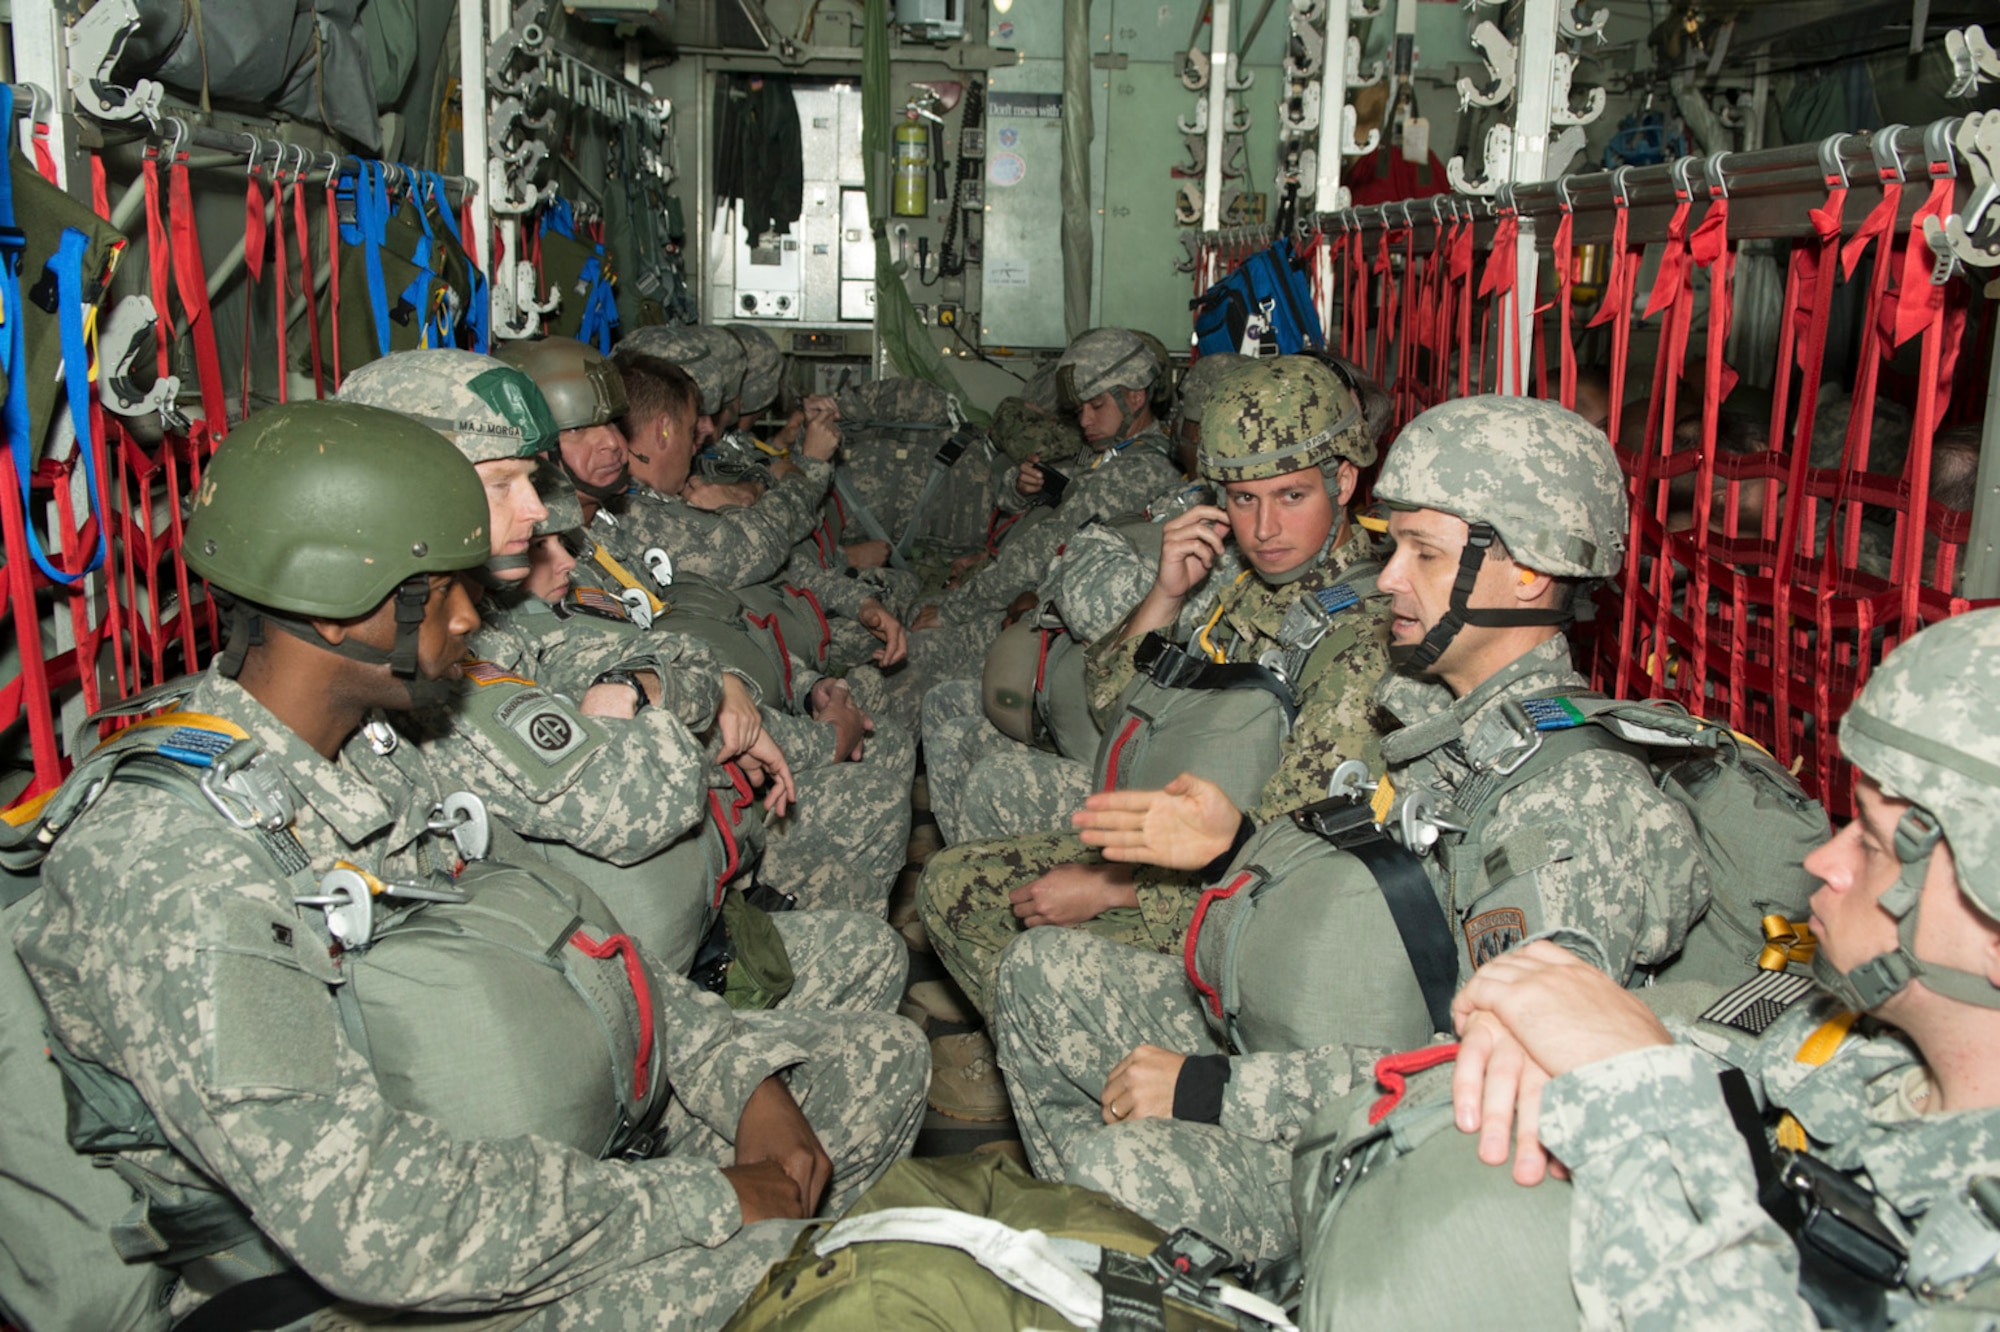 Paratroopers from the U.S. Army, Navy, Marines and Air Force prepare to do a static line jump from a C-130H2 aircraft belonging to the 136th Airlift Wing, Texas Air National Guard during a joint airborne air transportability training at McDill AFB, Fla., Nov. 15, 2013. The paratroopers jumped from 1,000 feet above ground level. (Air National Guard photo by Senior Master Sgt. Elizabeth Gilbert/released)